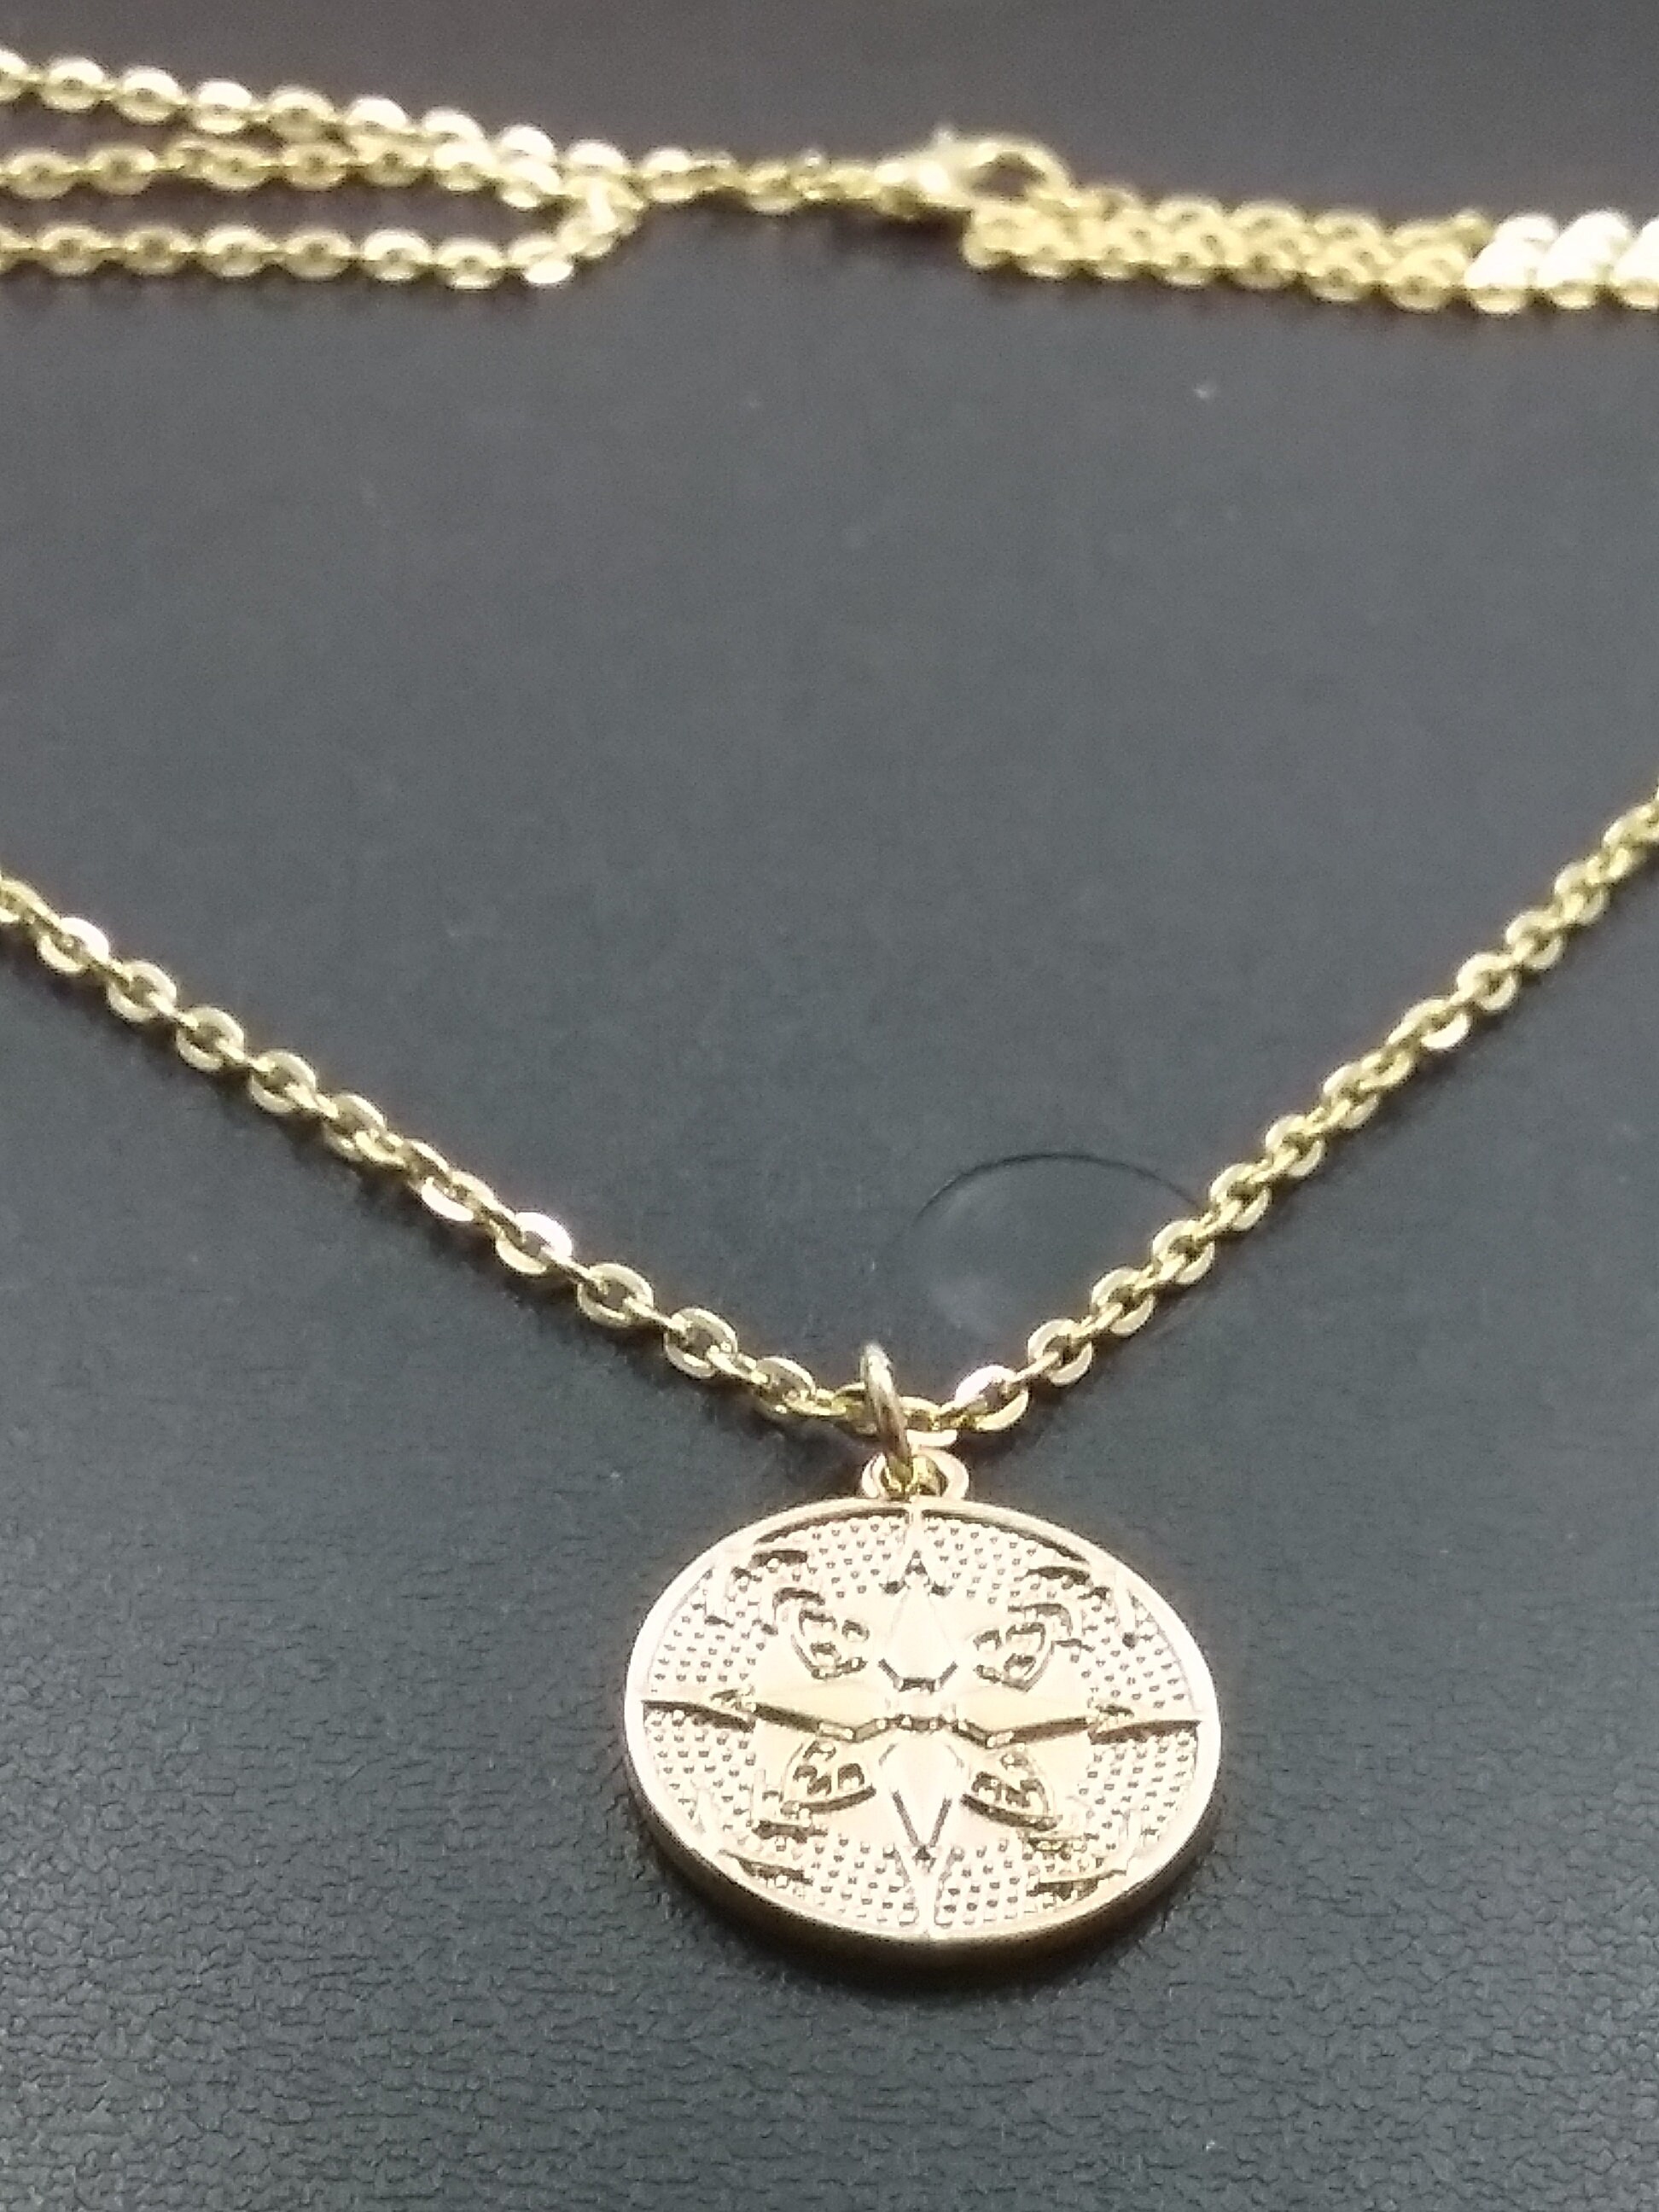 Necklace in 24 Carat Gold plated COMPASS with Deep | Etsy